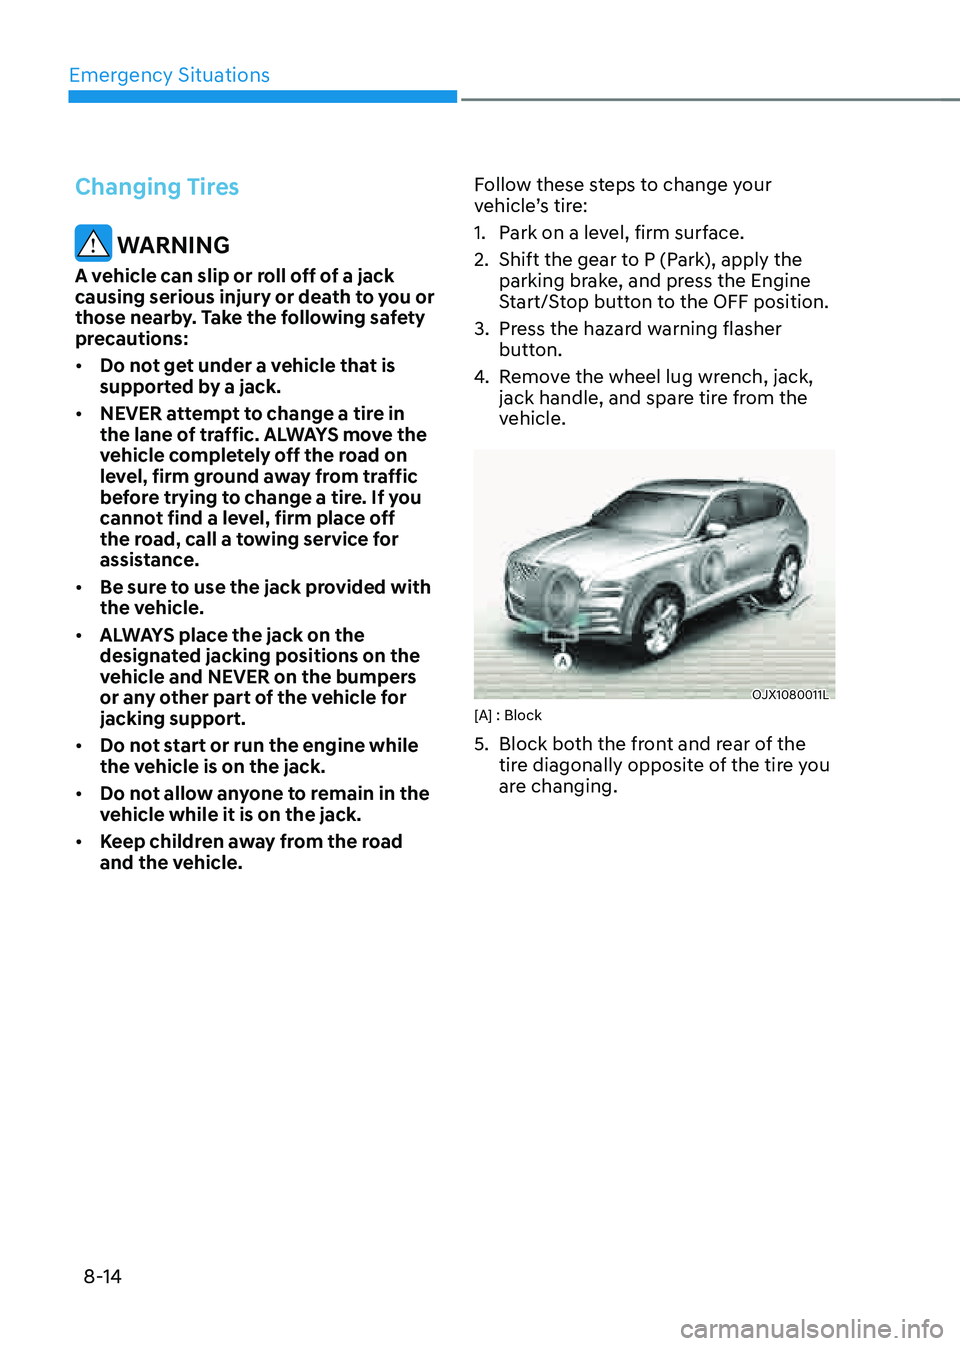 GENESIS GV80 2021  Owners Manual Emergency Situations
8-14
Changing Tires
 WARNING
A vehicle can slip or roll off of a jack 
causing serious injury or death to you or 
those nearby. Take the following safety 
precautions:
• Do not 